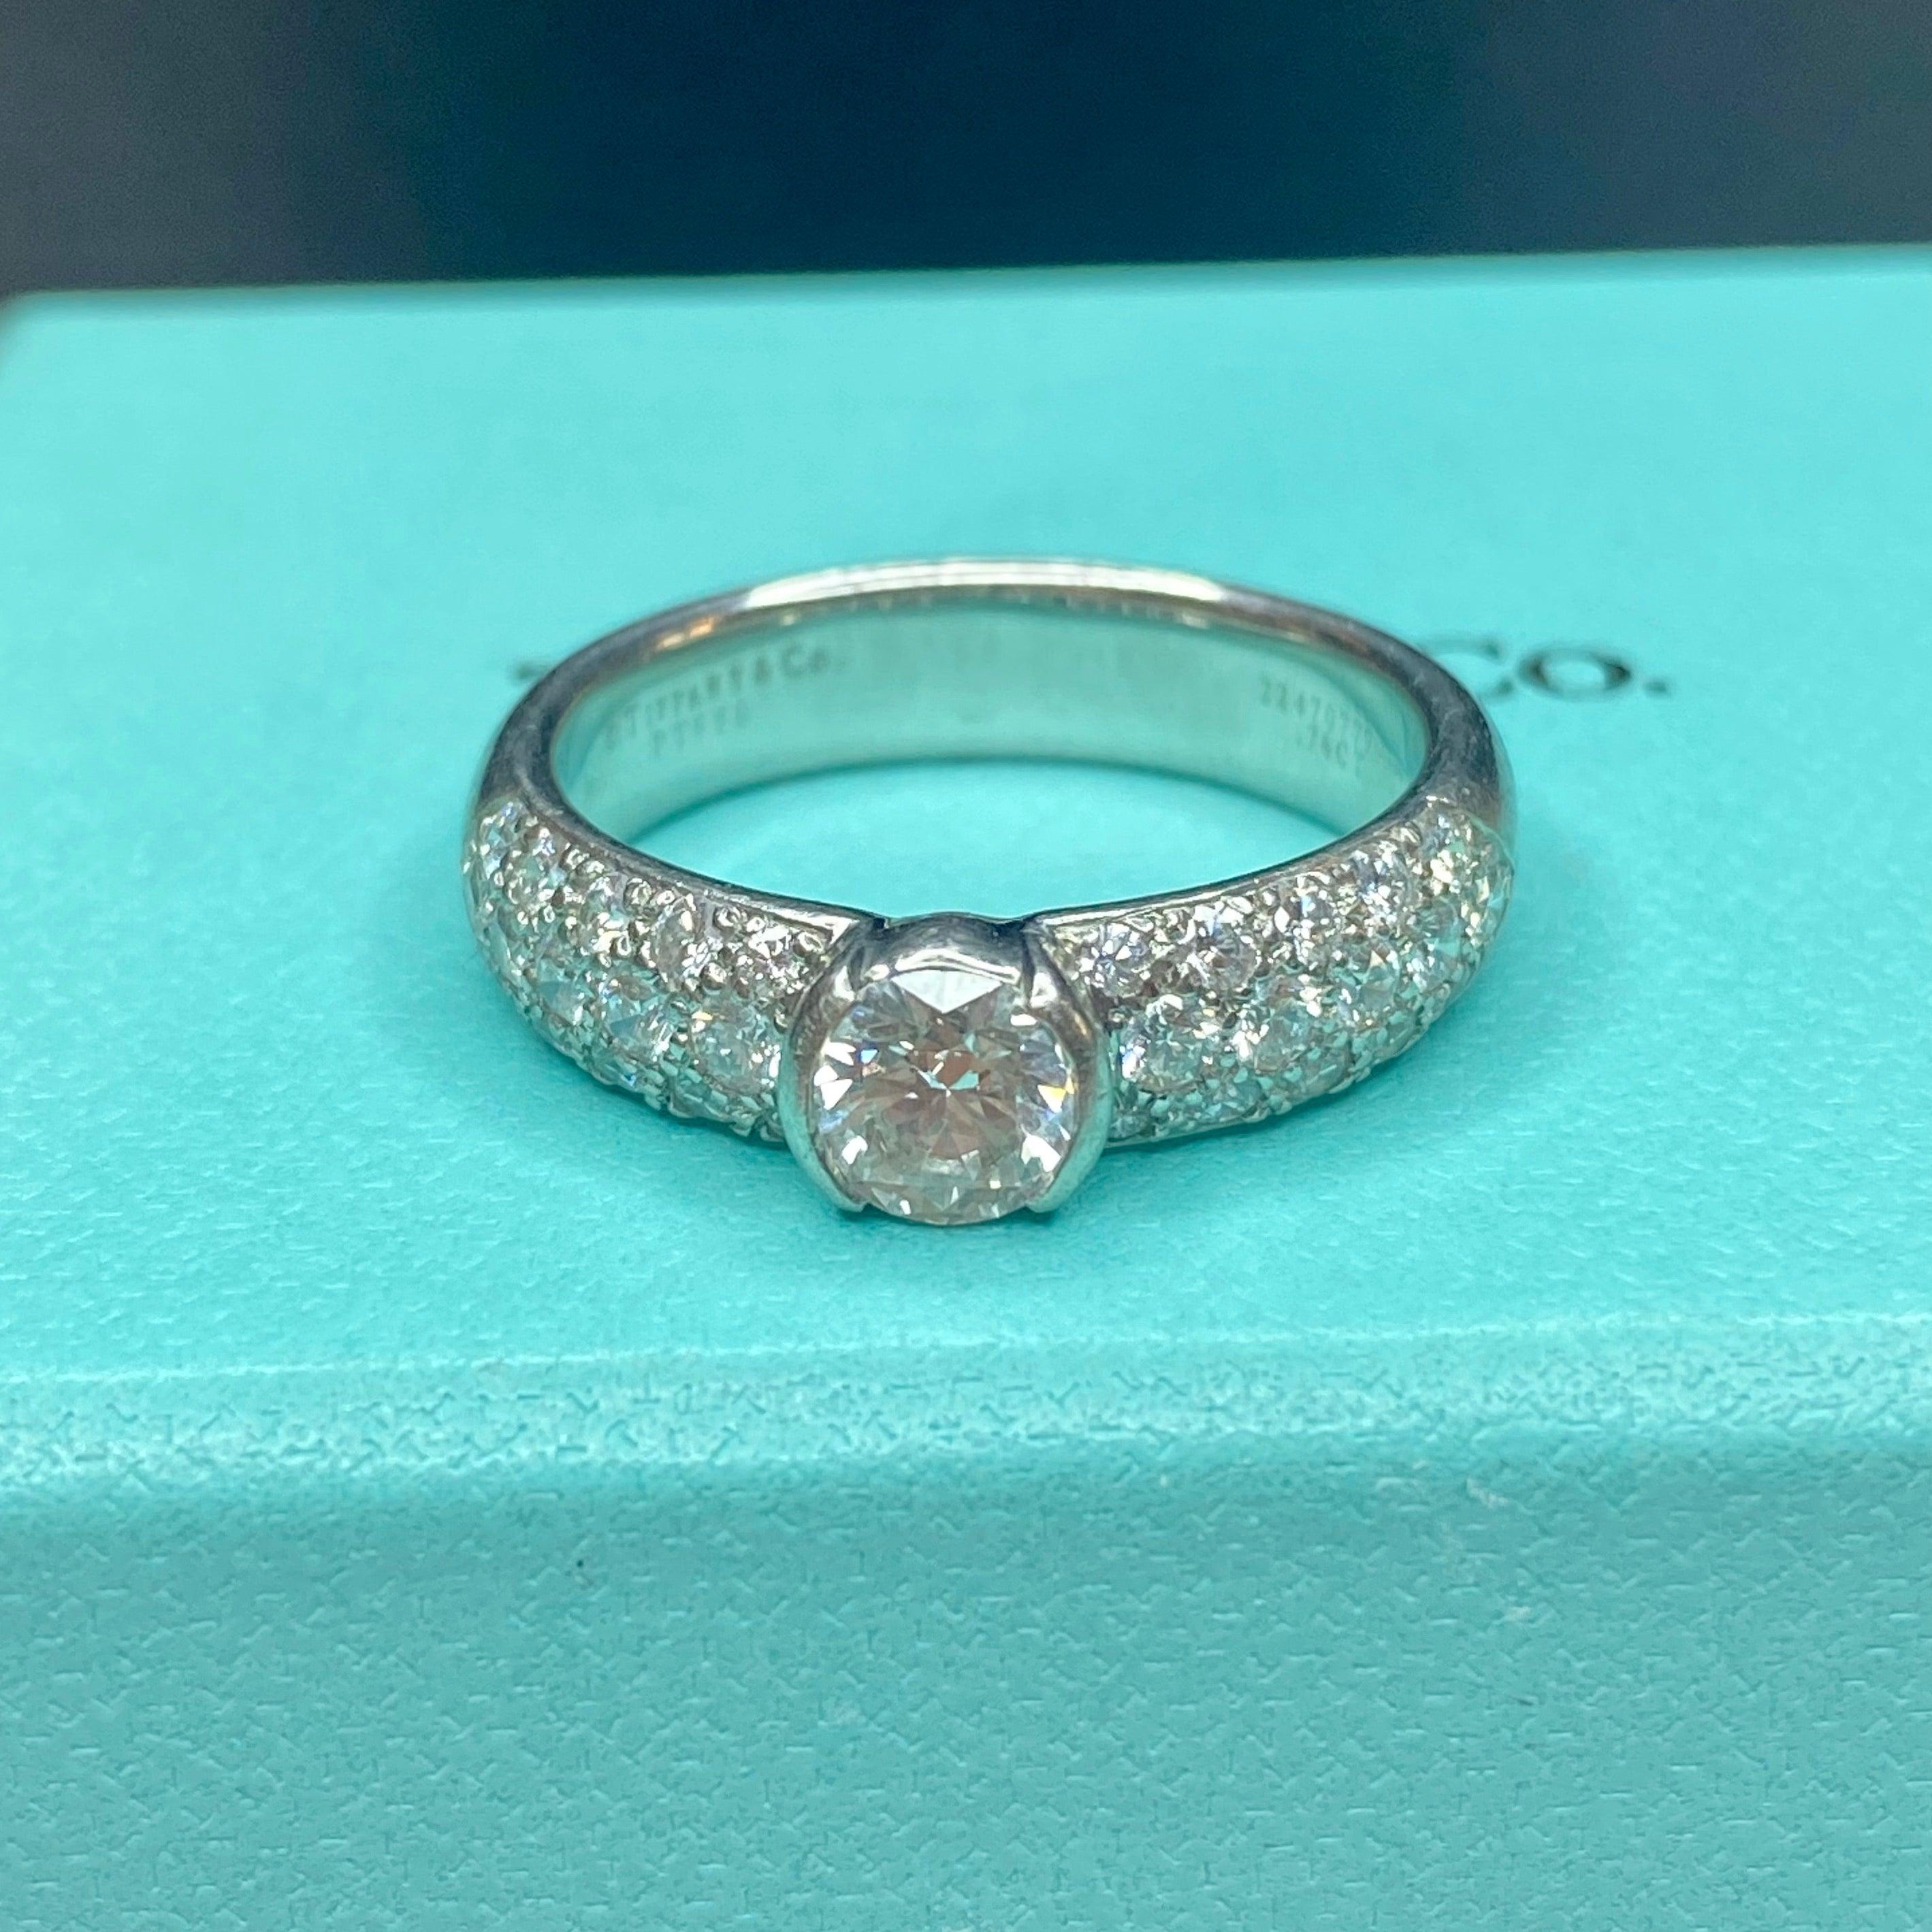 Tiffany & Co. platinum engagement ring from the Etoile collection, featuring a round brilliant cut diamond solitaire with pave' diamond set shoulders. Original diamond certificate included. 
Center diamond: 0.76ct. Color: H, Clarity: VS1
30 round